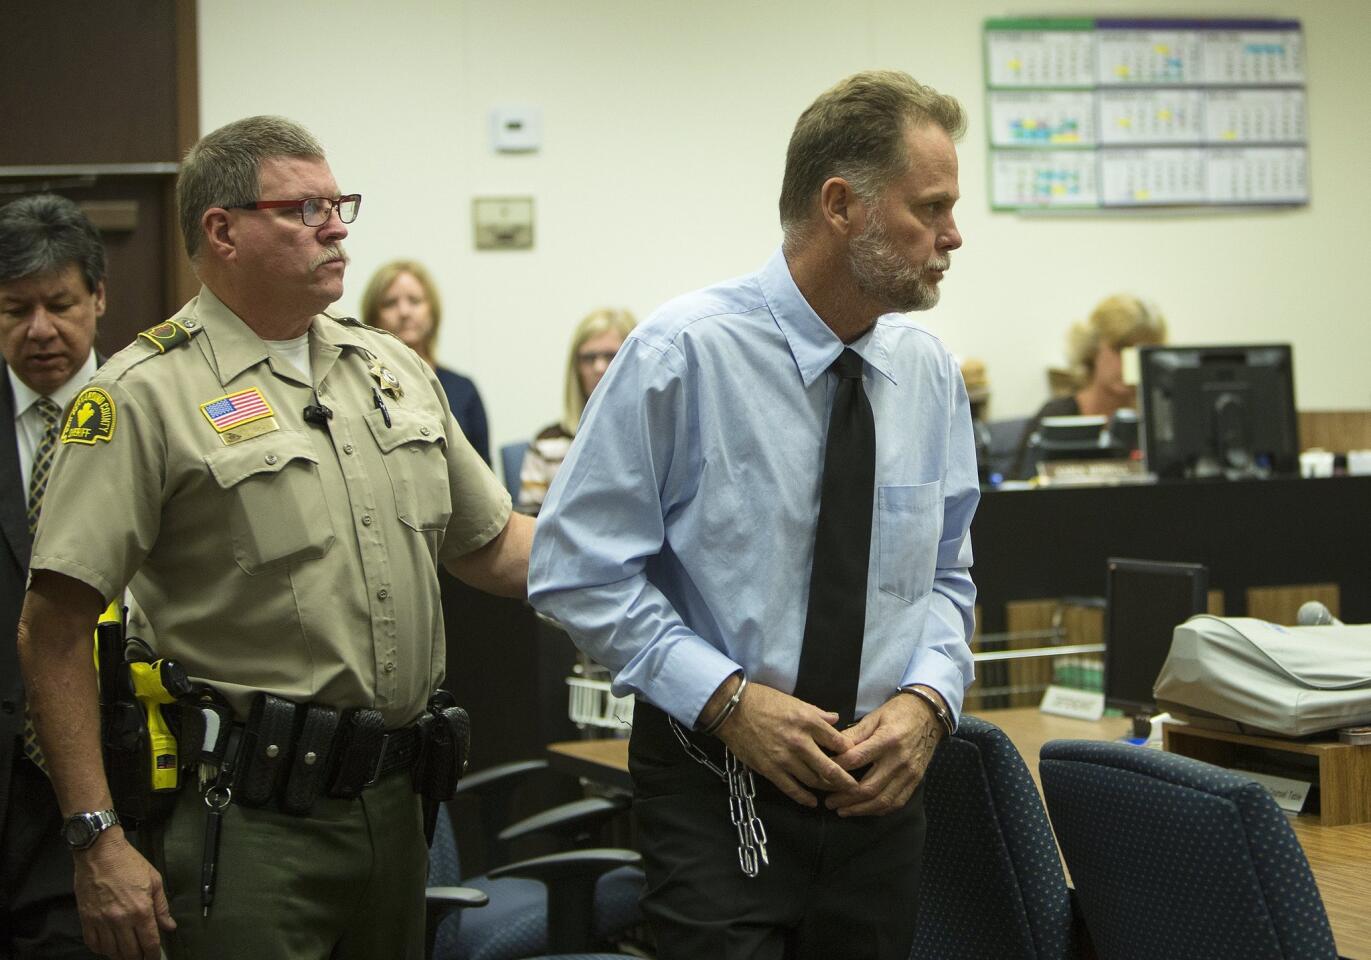 Charles Merritt is led out of the courtroom after his arraignment, where he pleaded not guilty in the slayings of the McStay family.